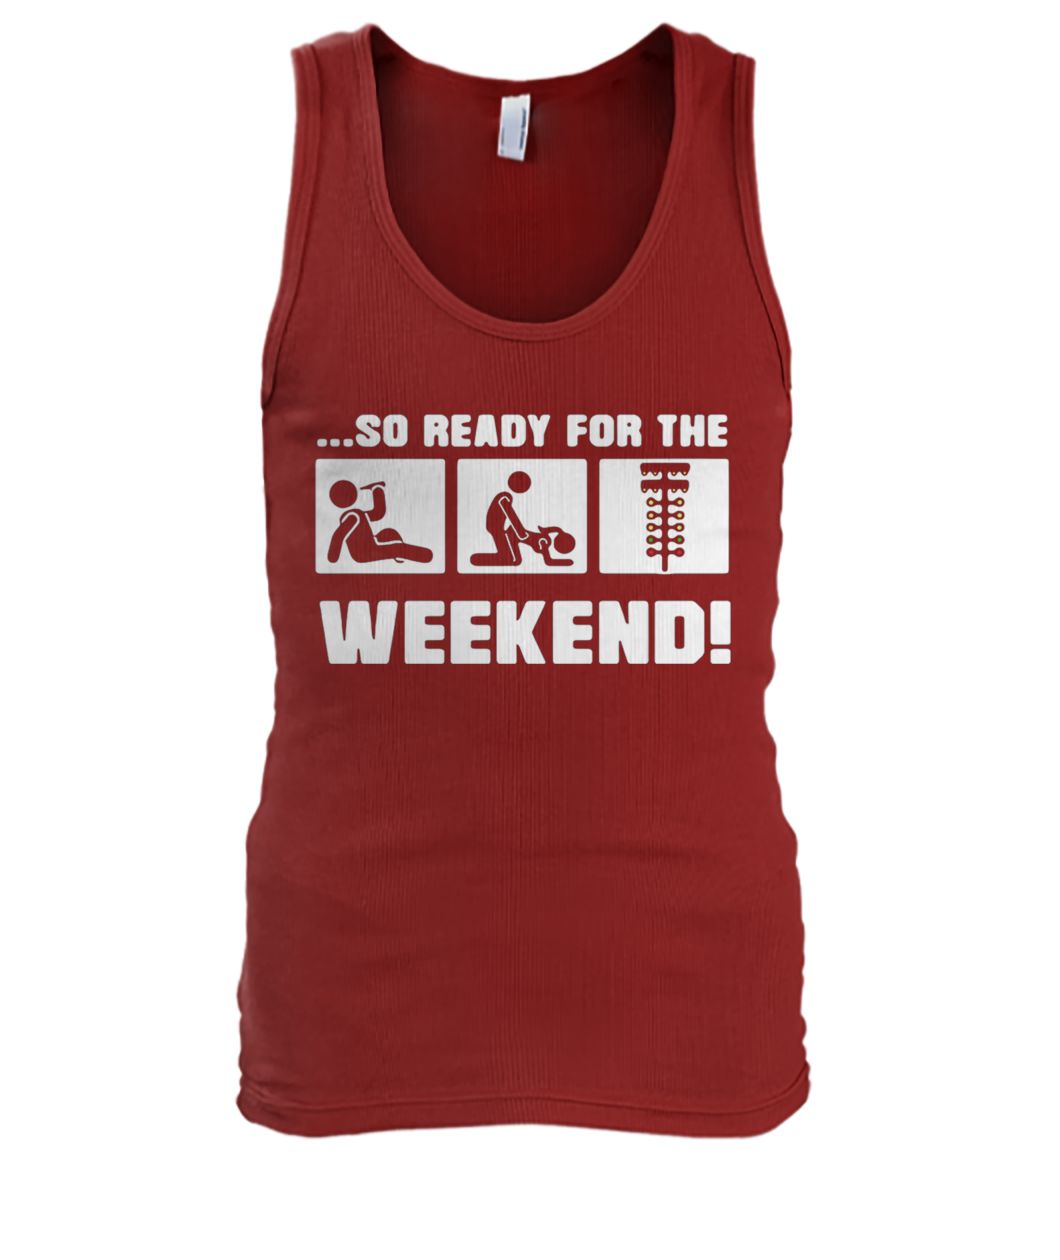 Drinking sex and drag racing so ready for the weekend men's tank top